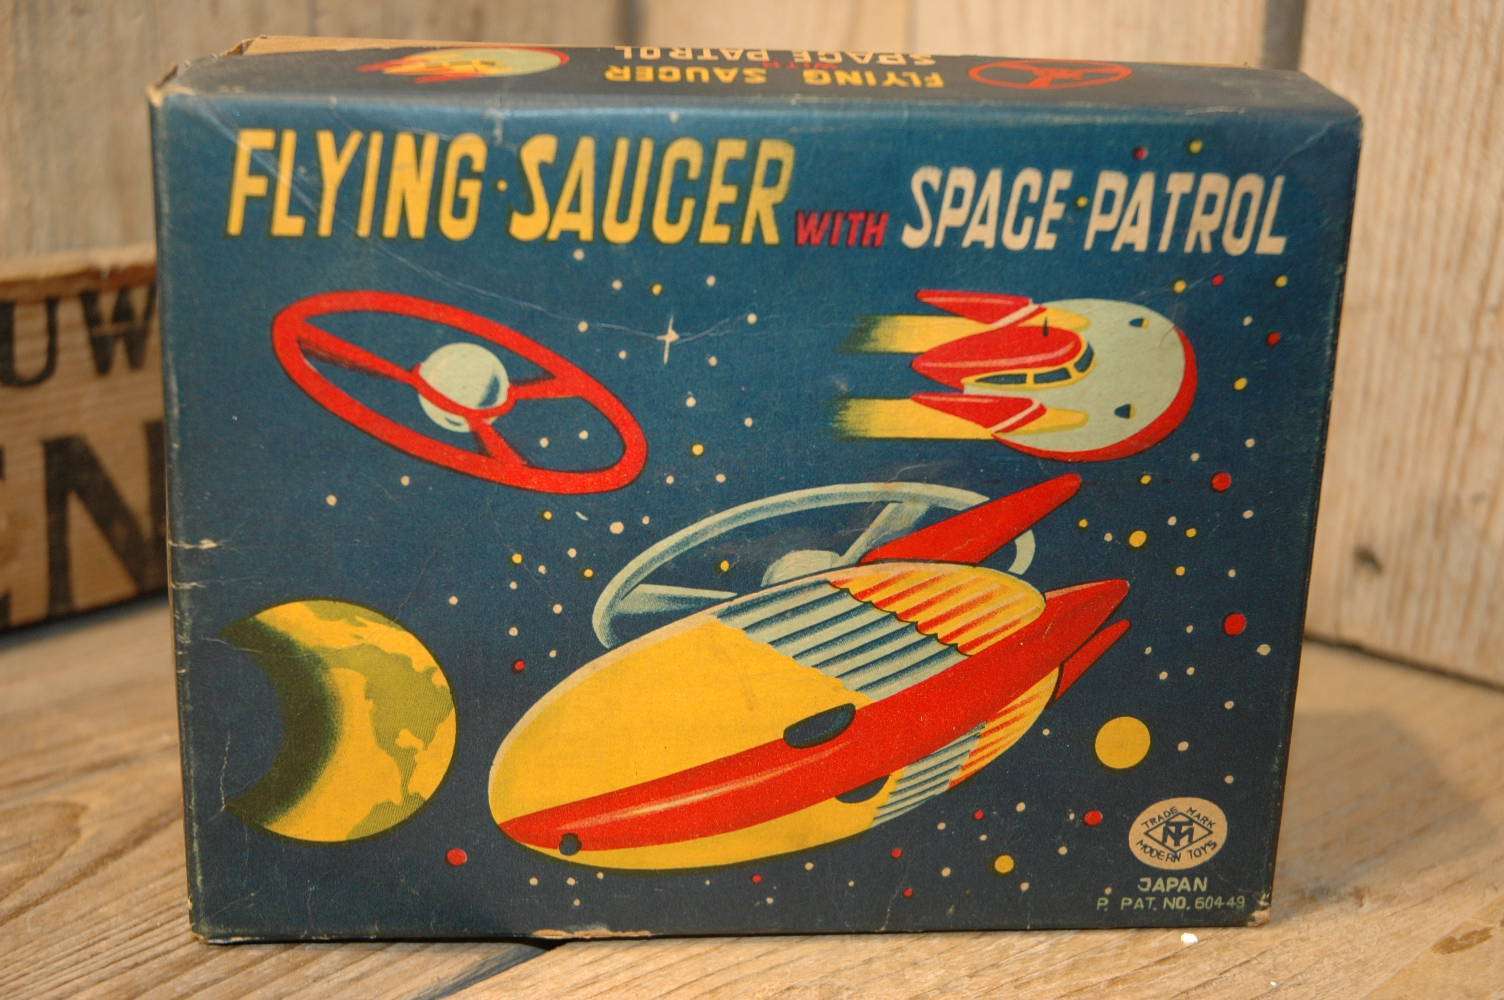 Modern Toys - Flying Saucer with Space Patrol